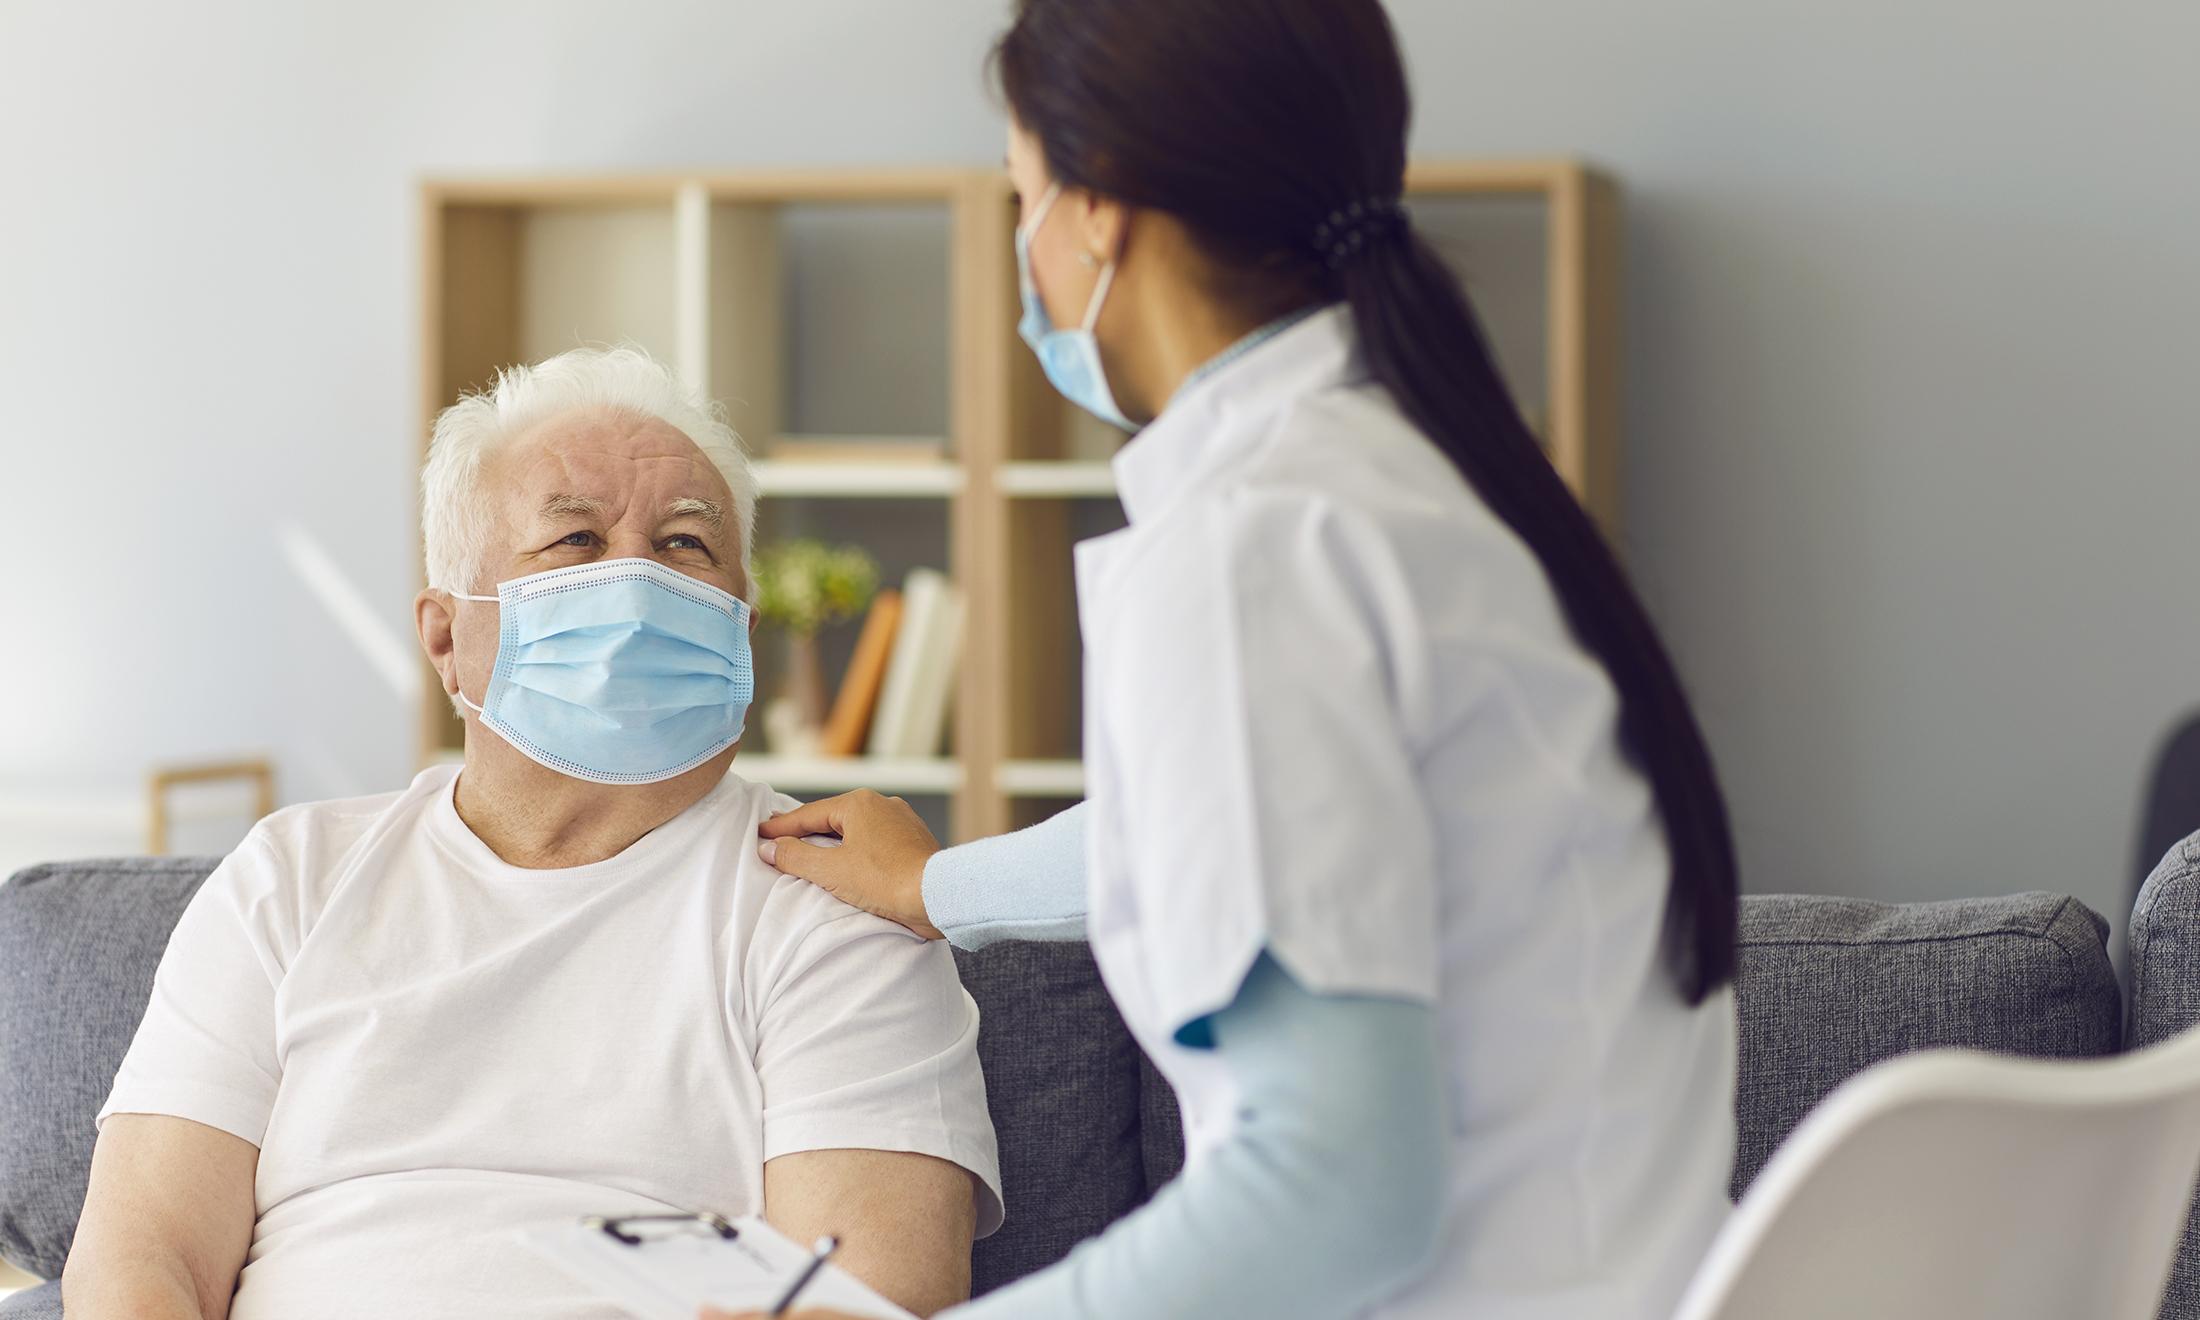 An image of a senior citizen wearing a mask and talking to a doctor